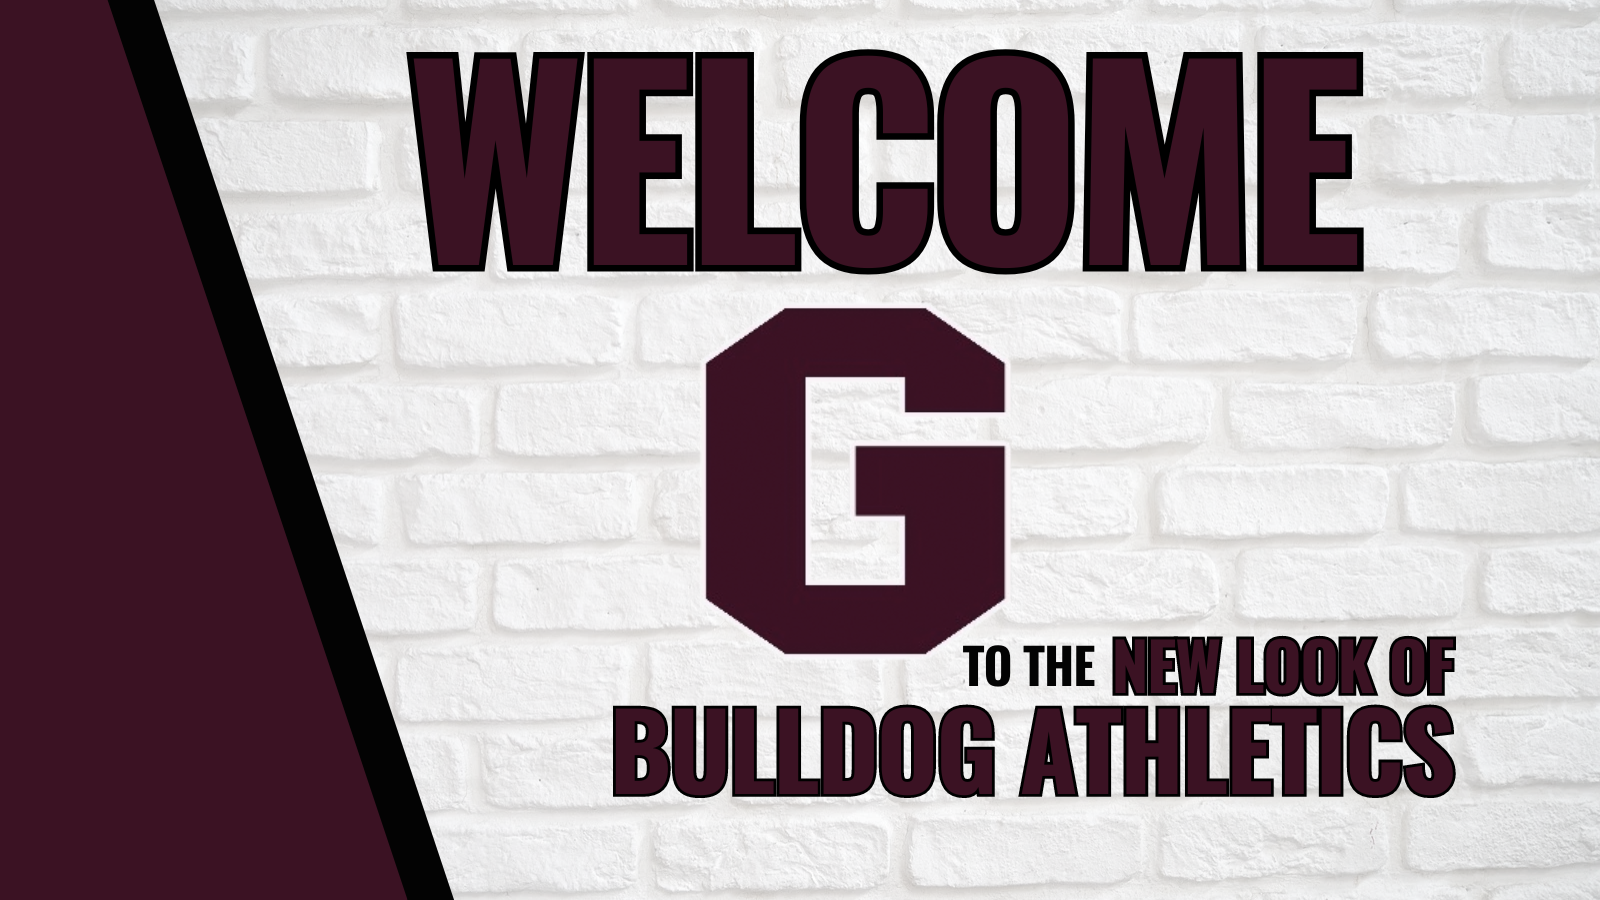 1715187984_NewLayoutAnnouncement46.png - Image for 🎉 Exciting News for Bulldog Athletics Fans! 🎉